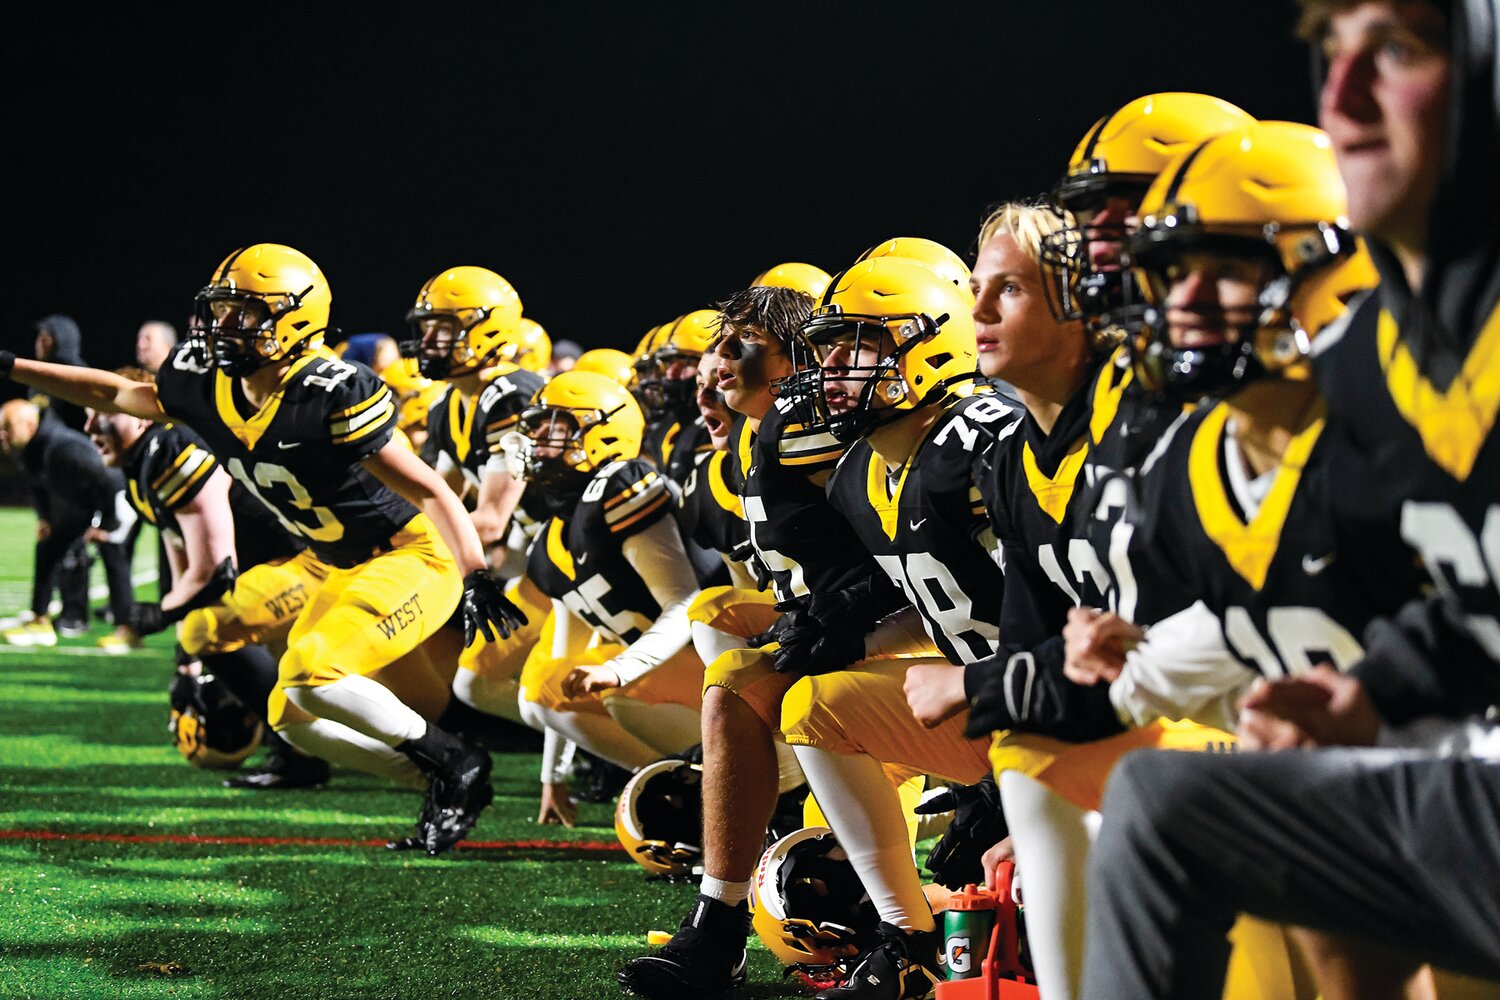 Central Bucks West players line up arm-in-arm to watch the extra-point kick in overtime.